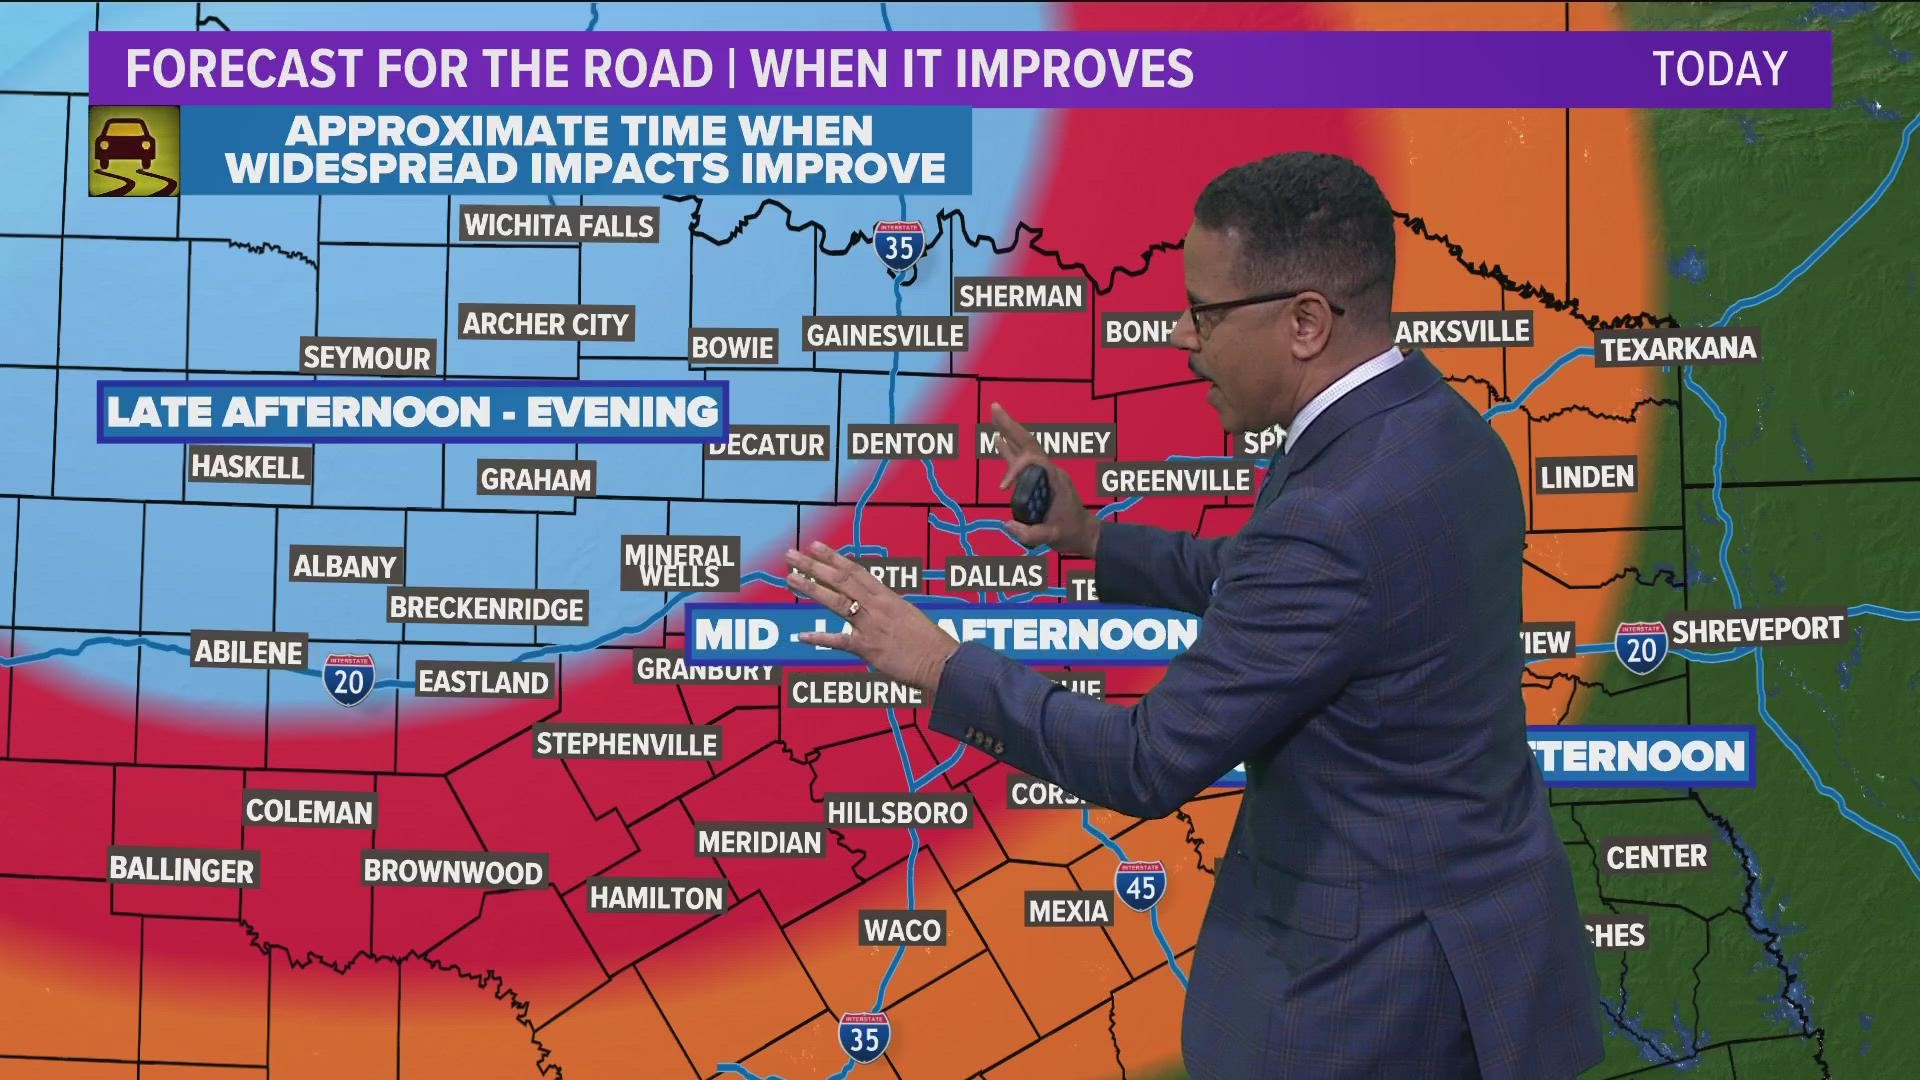 WFAA meteorologist Greg Fields gives a timeline for when we can expect safer, drier roadways